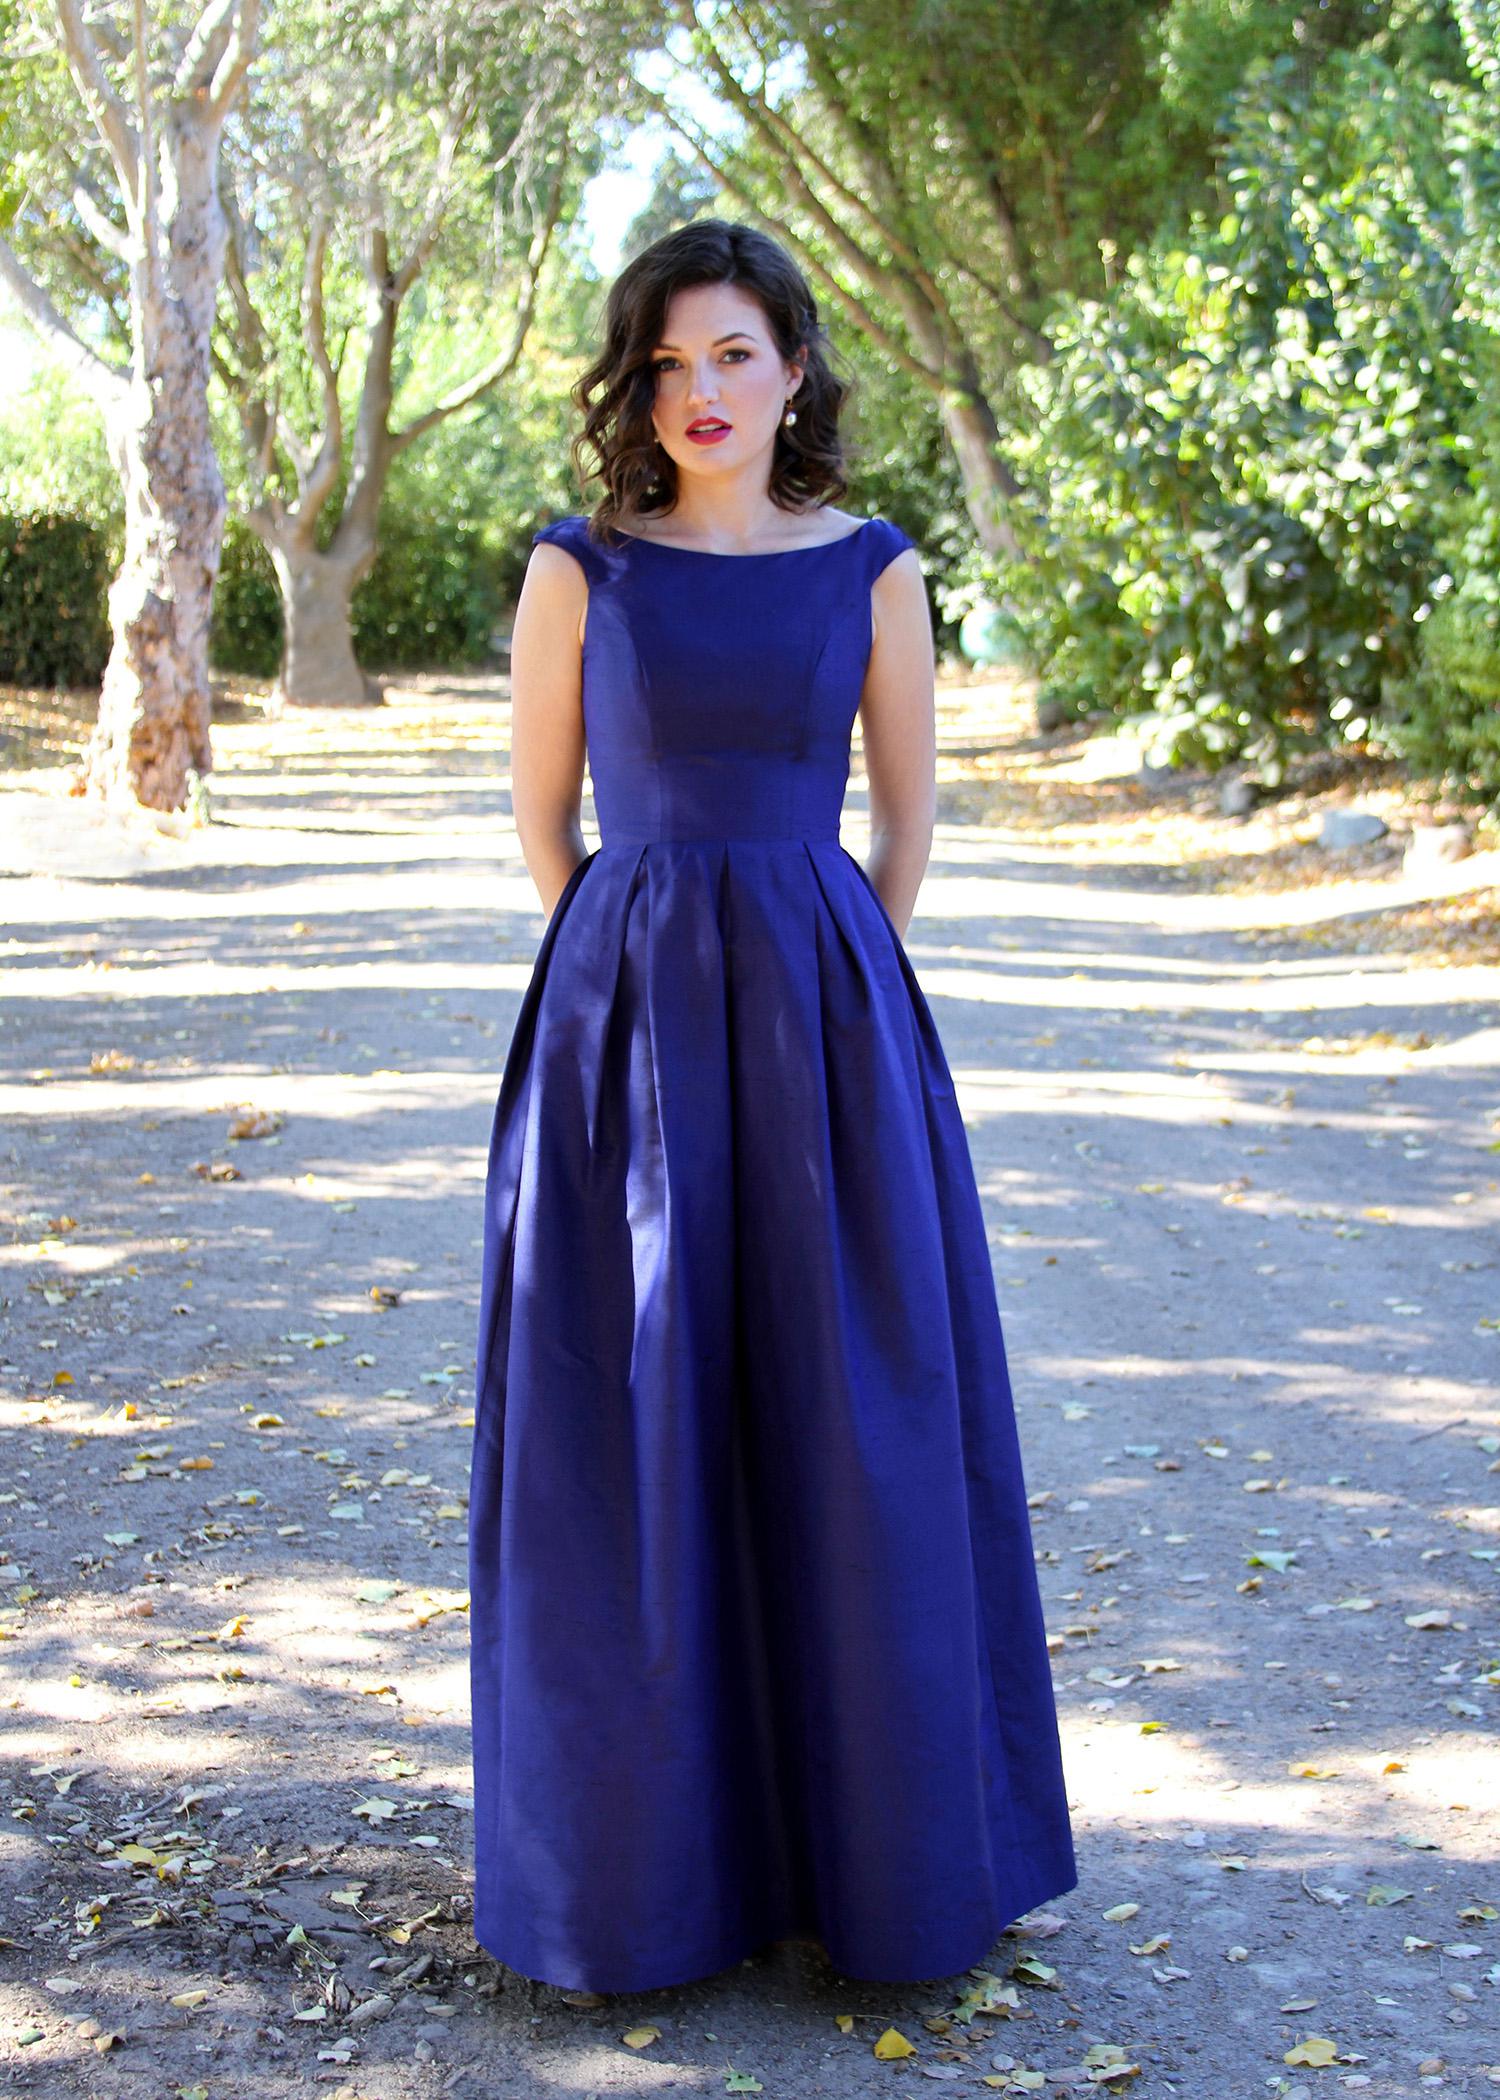 Mississippi-based designer Loren James, creator of the bridal fashion company Mamie+James, makes custom-ordered, classically styled dresses for brides and bridesmaids. These come in a wide range of colors and fabrics, such as the gown with Bonne Chance bodice and No.4 skirt this model is wearing. (Photo courtesy of Larissa Erin Greer)